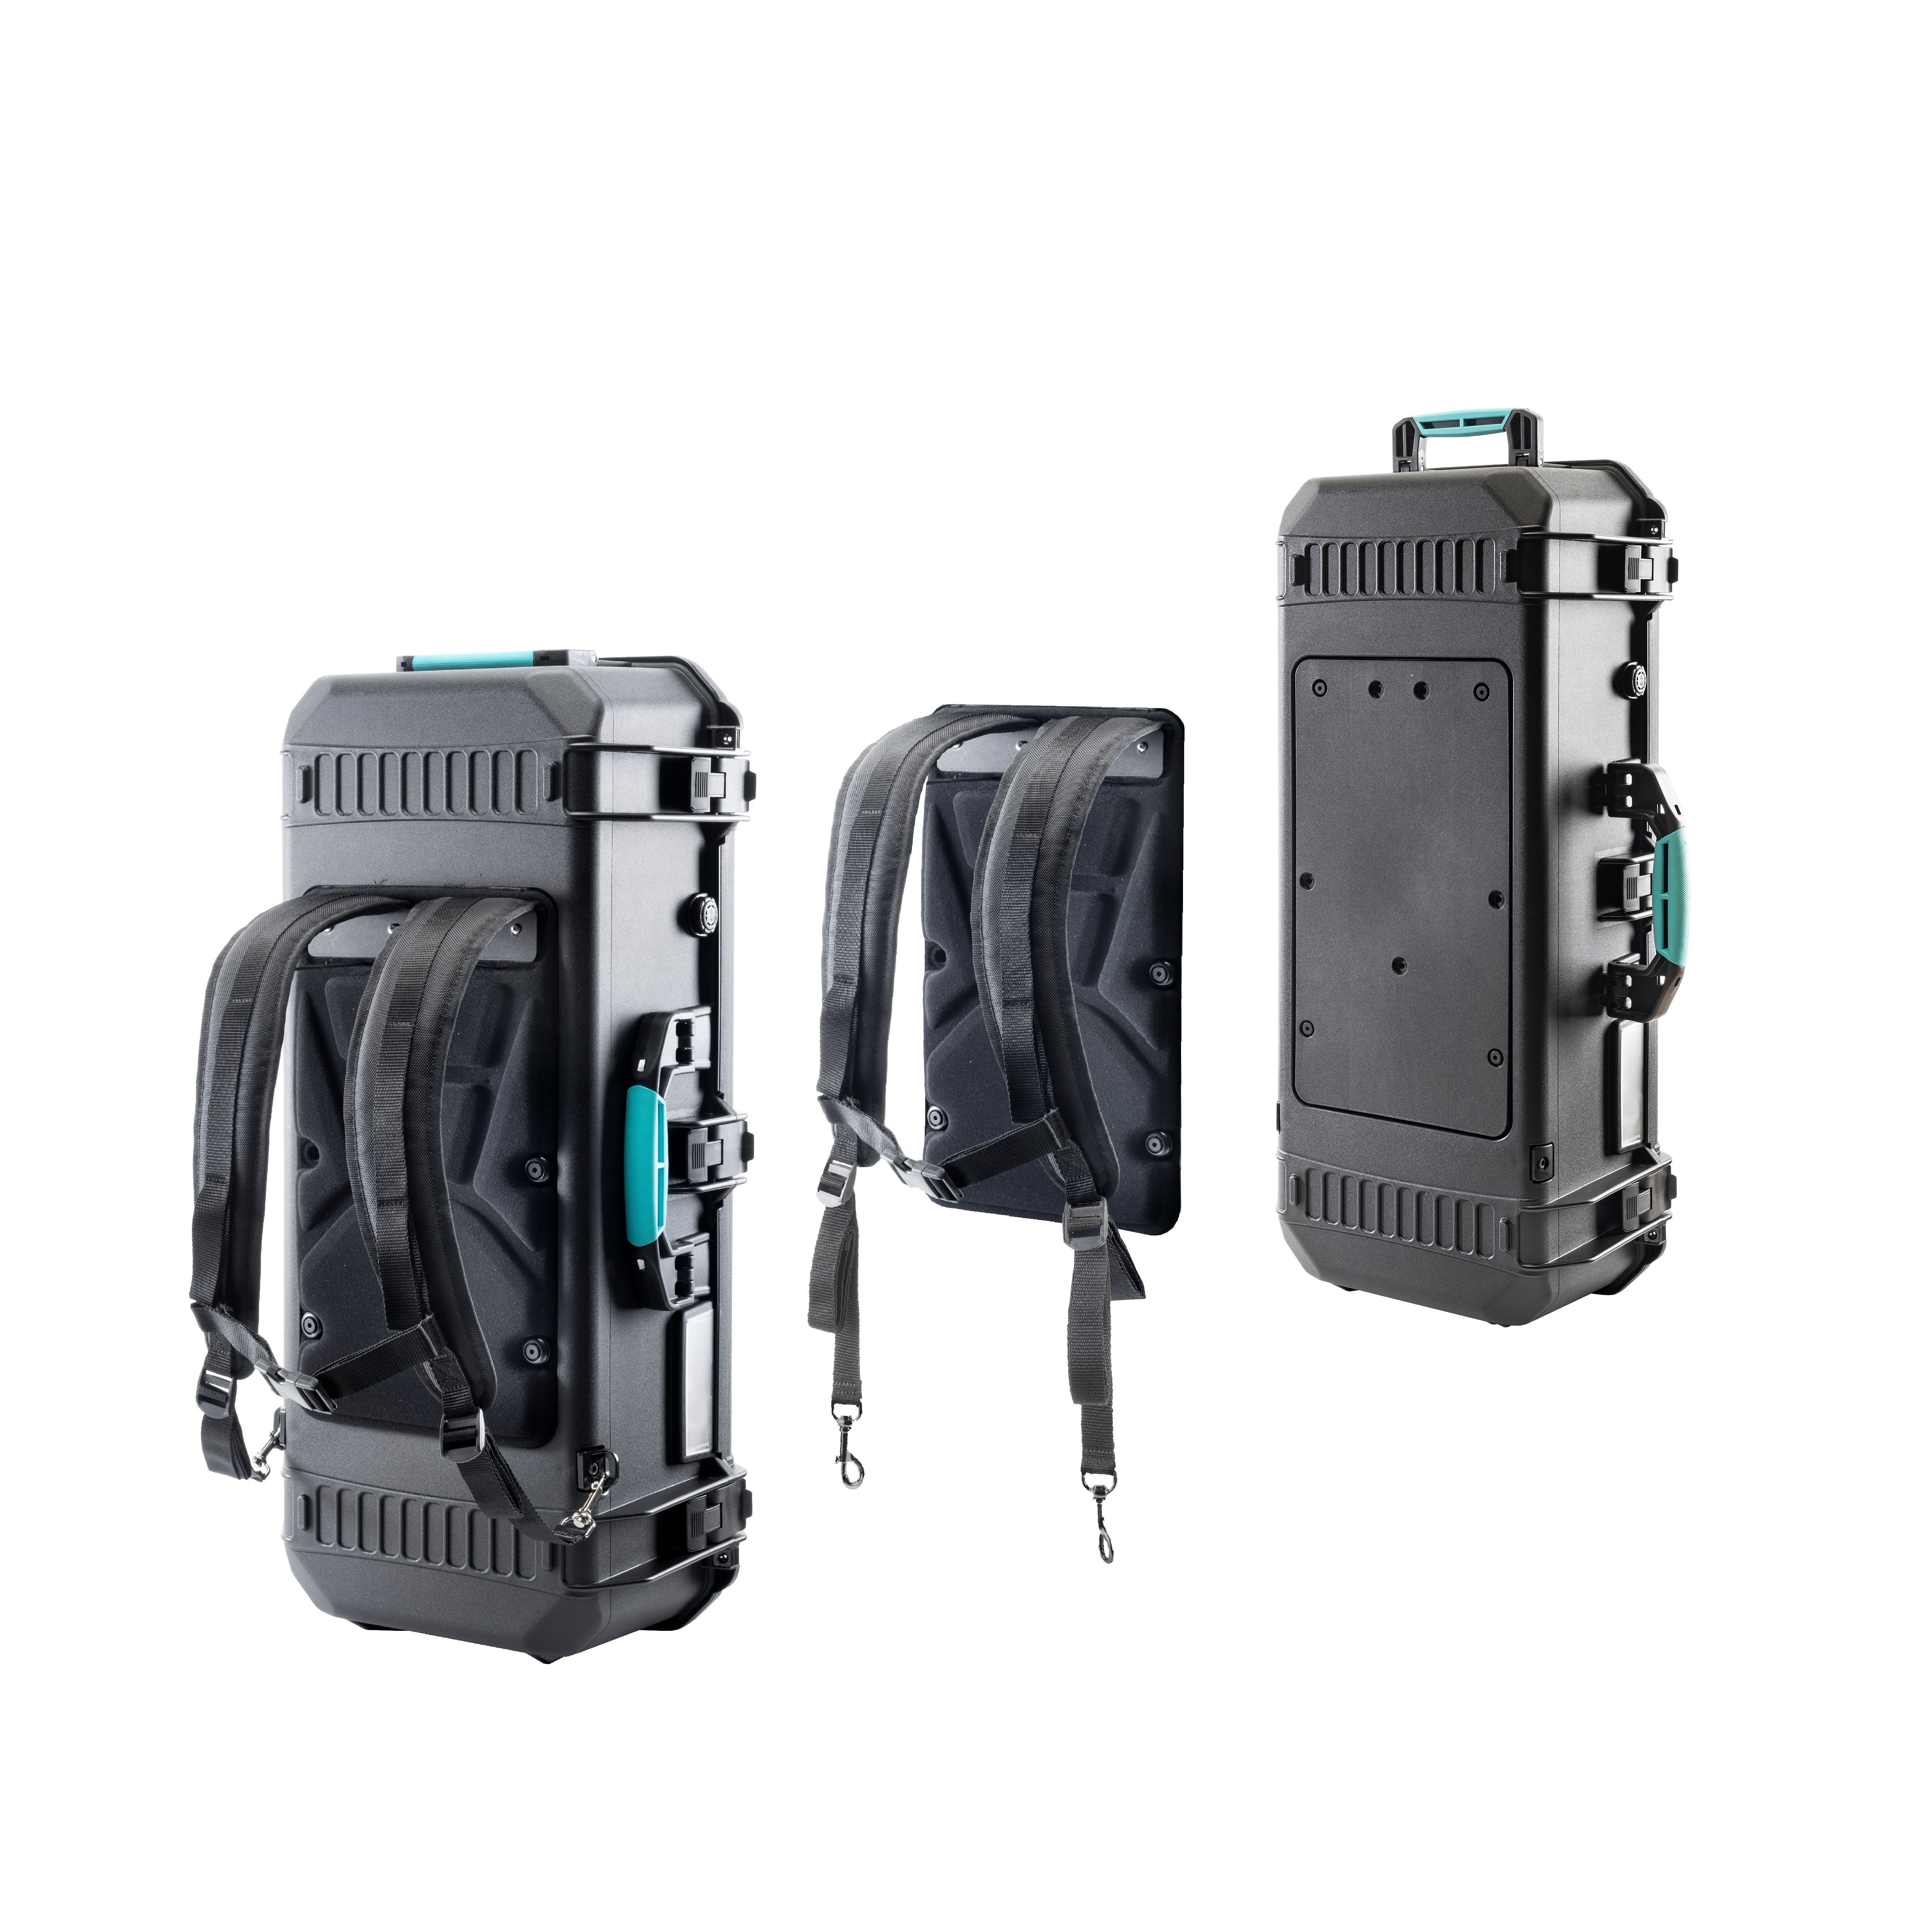 HPRC5200R the first and only resin case that becomes backpack in seconds